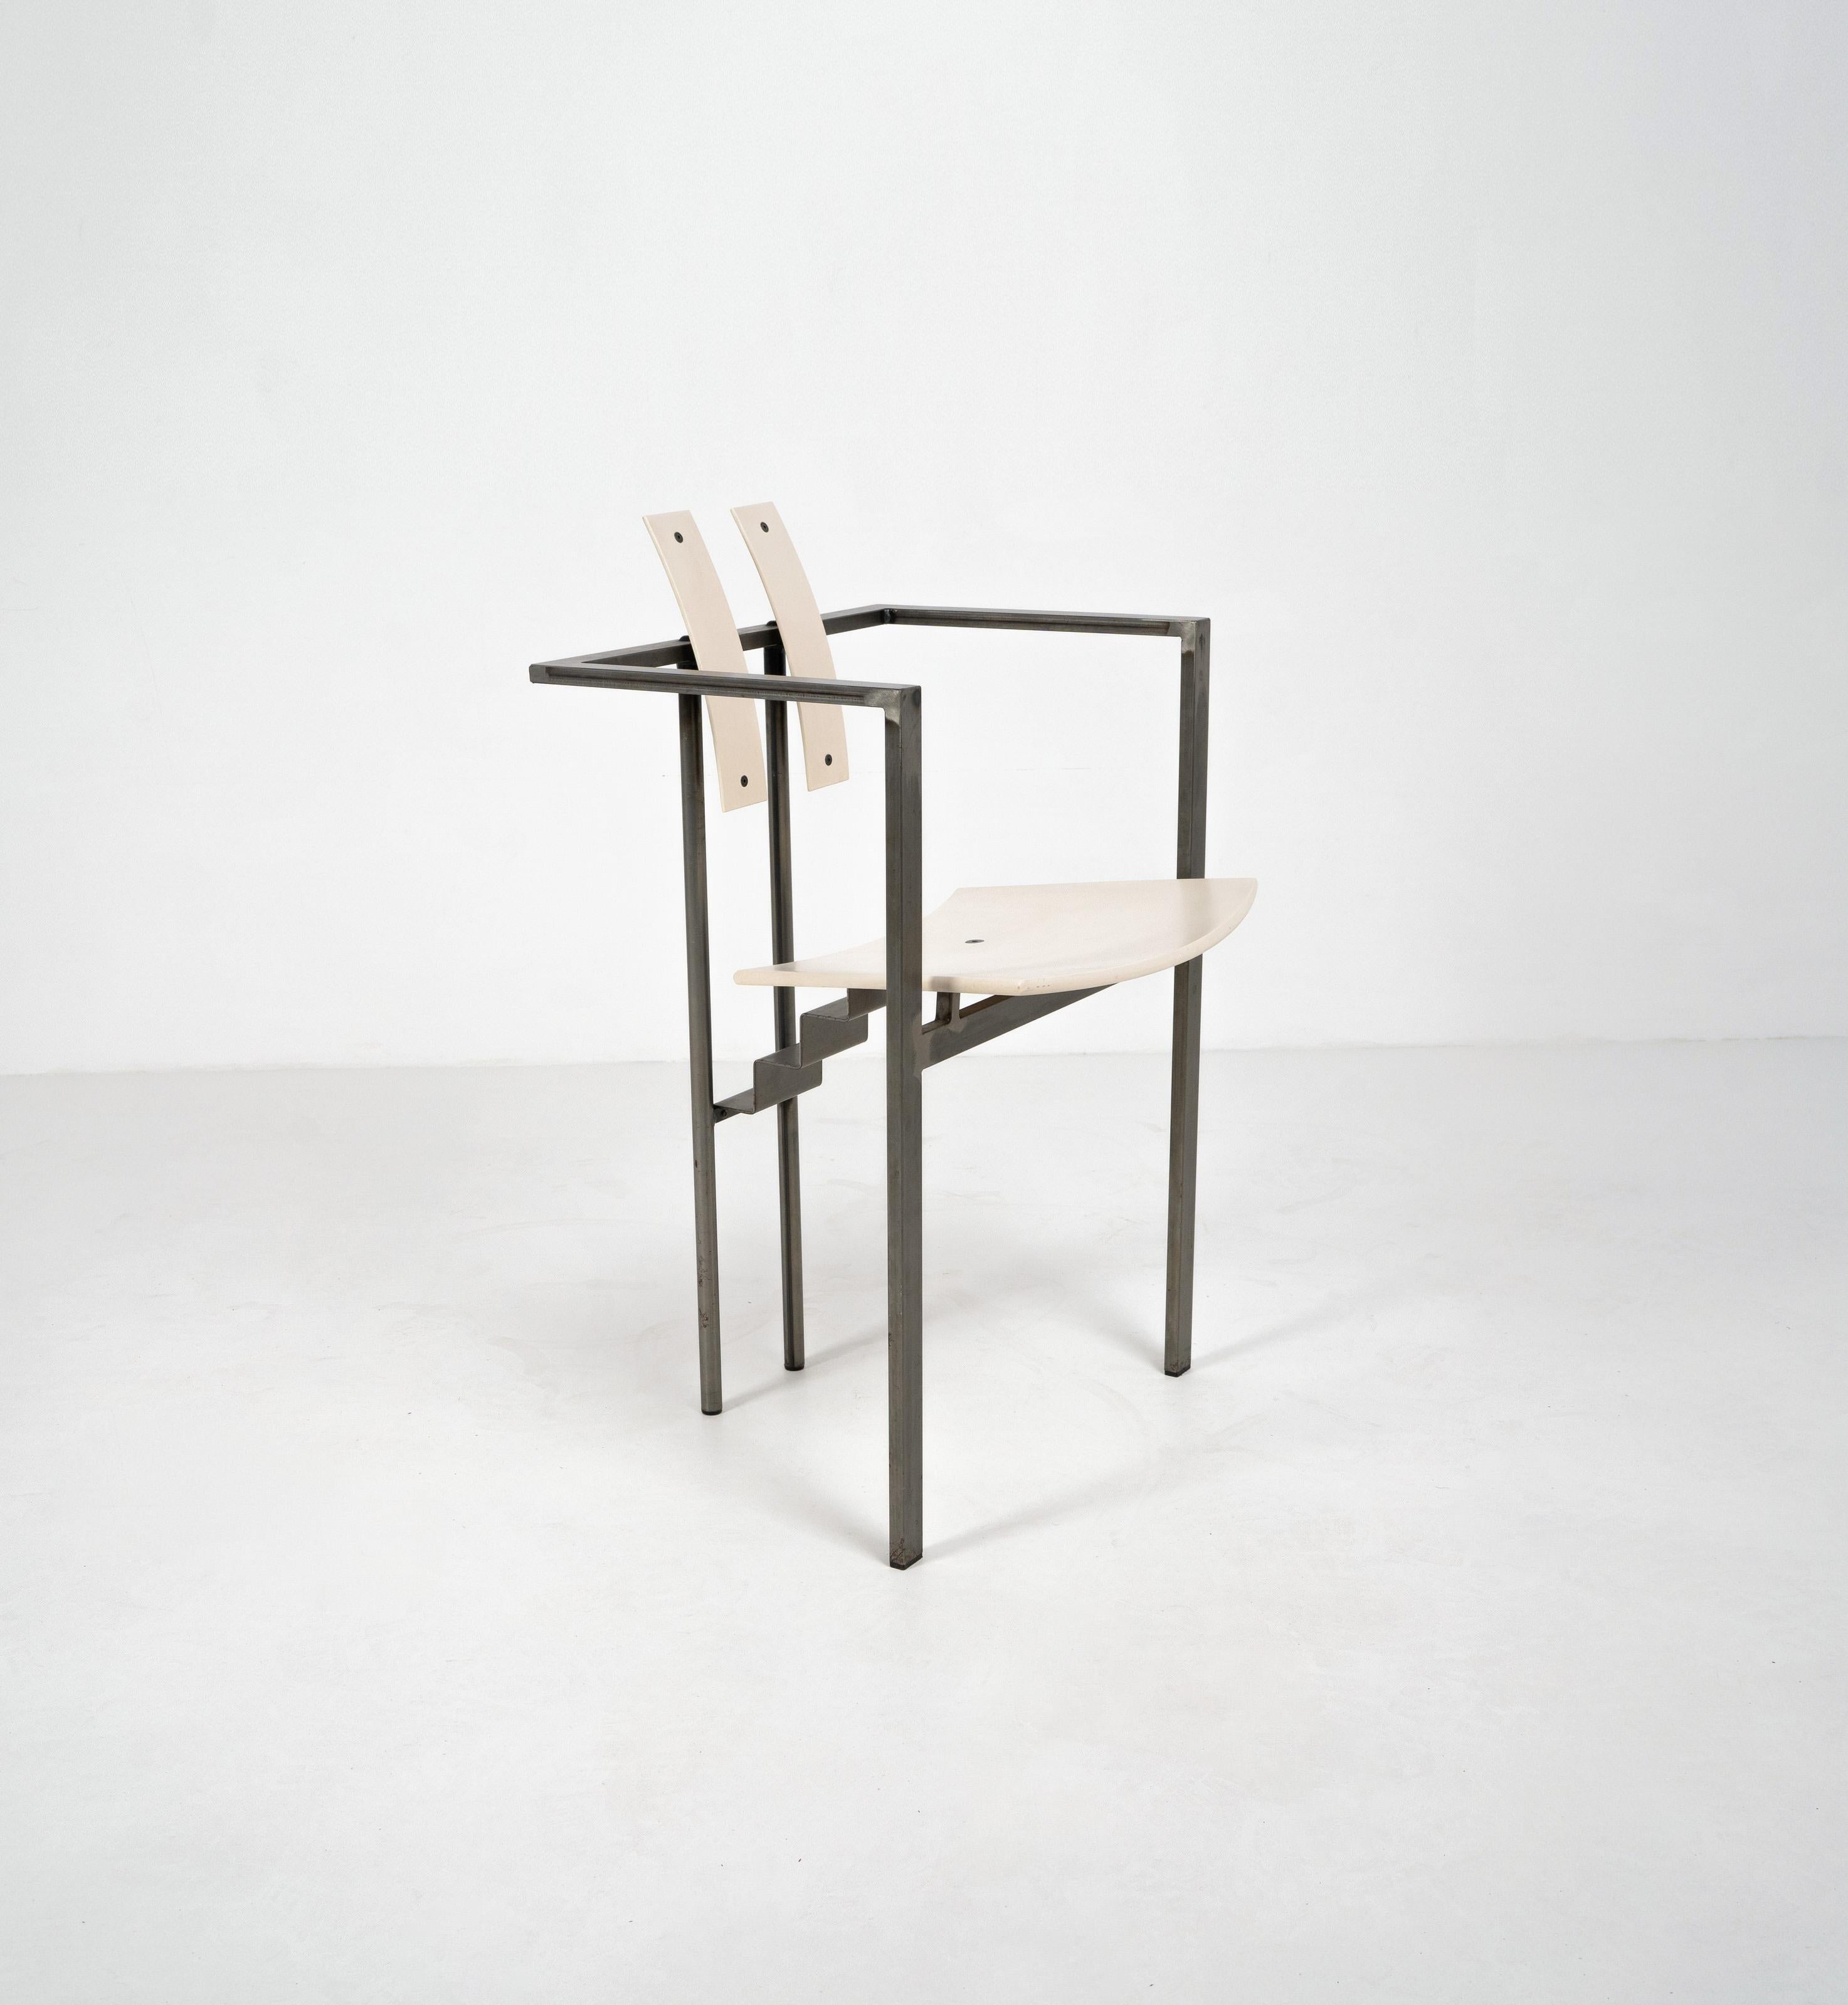 A postmodern 'Trix' chair designed by Karl Friedrich Förster and produced in the 1980's. Composed from a tubular steel frame, off white bent plywood backrests and an off white painted plywood seat. 


Dimensions (cm, approx): 
Height: 82
Width: